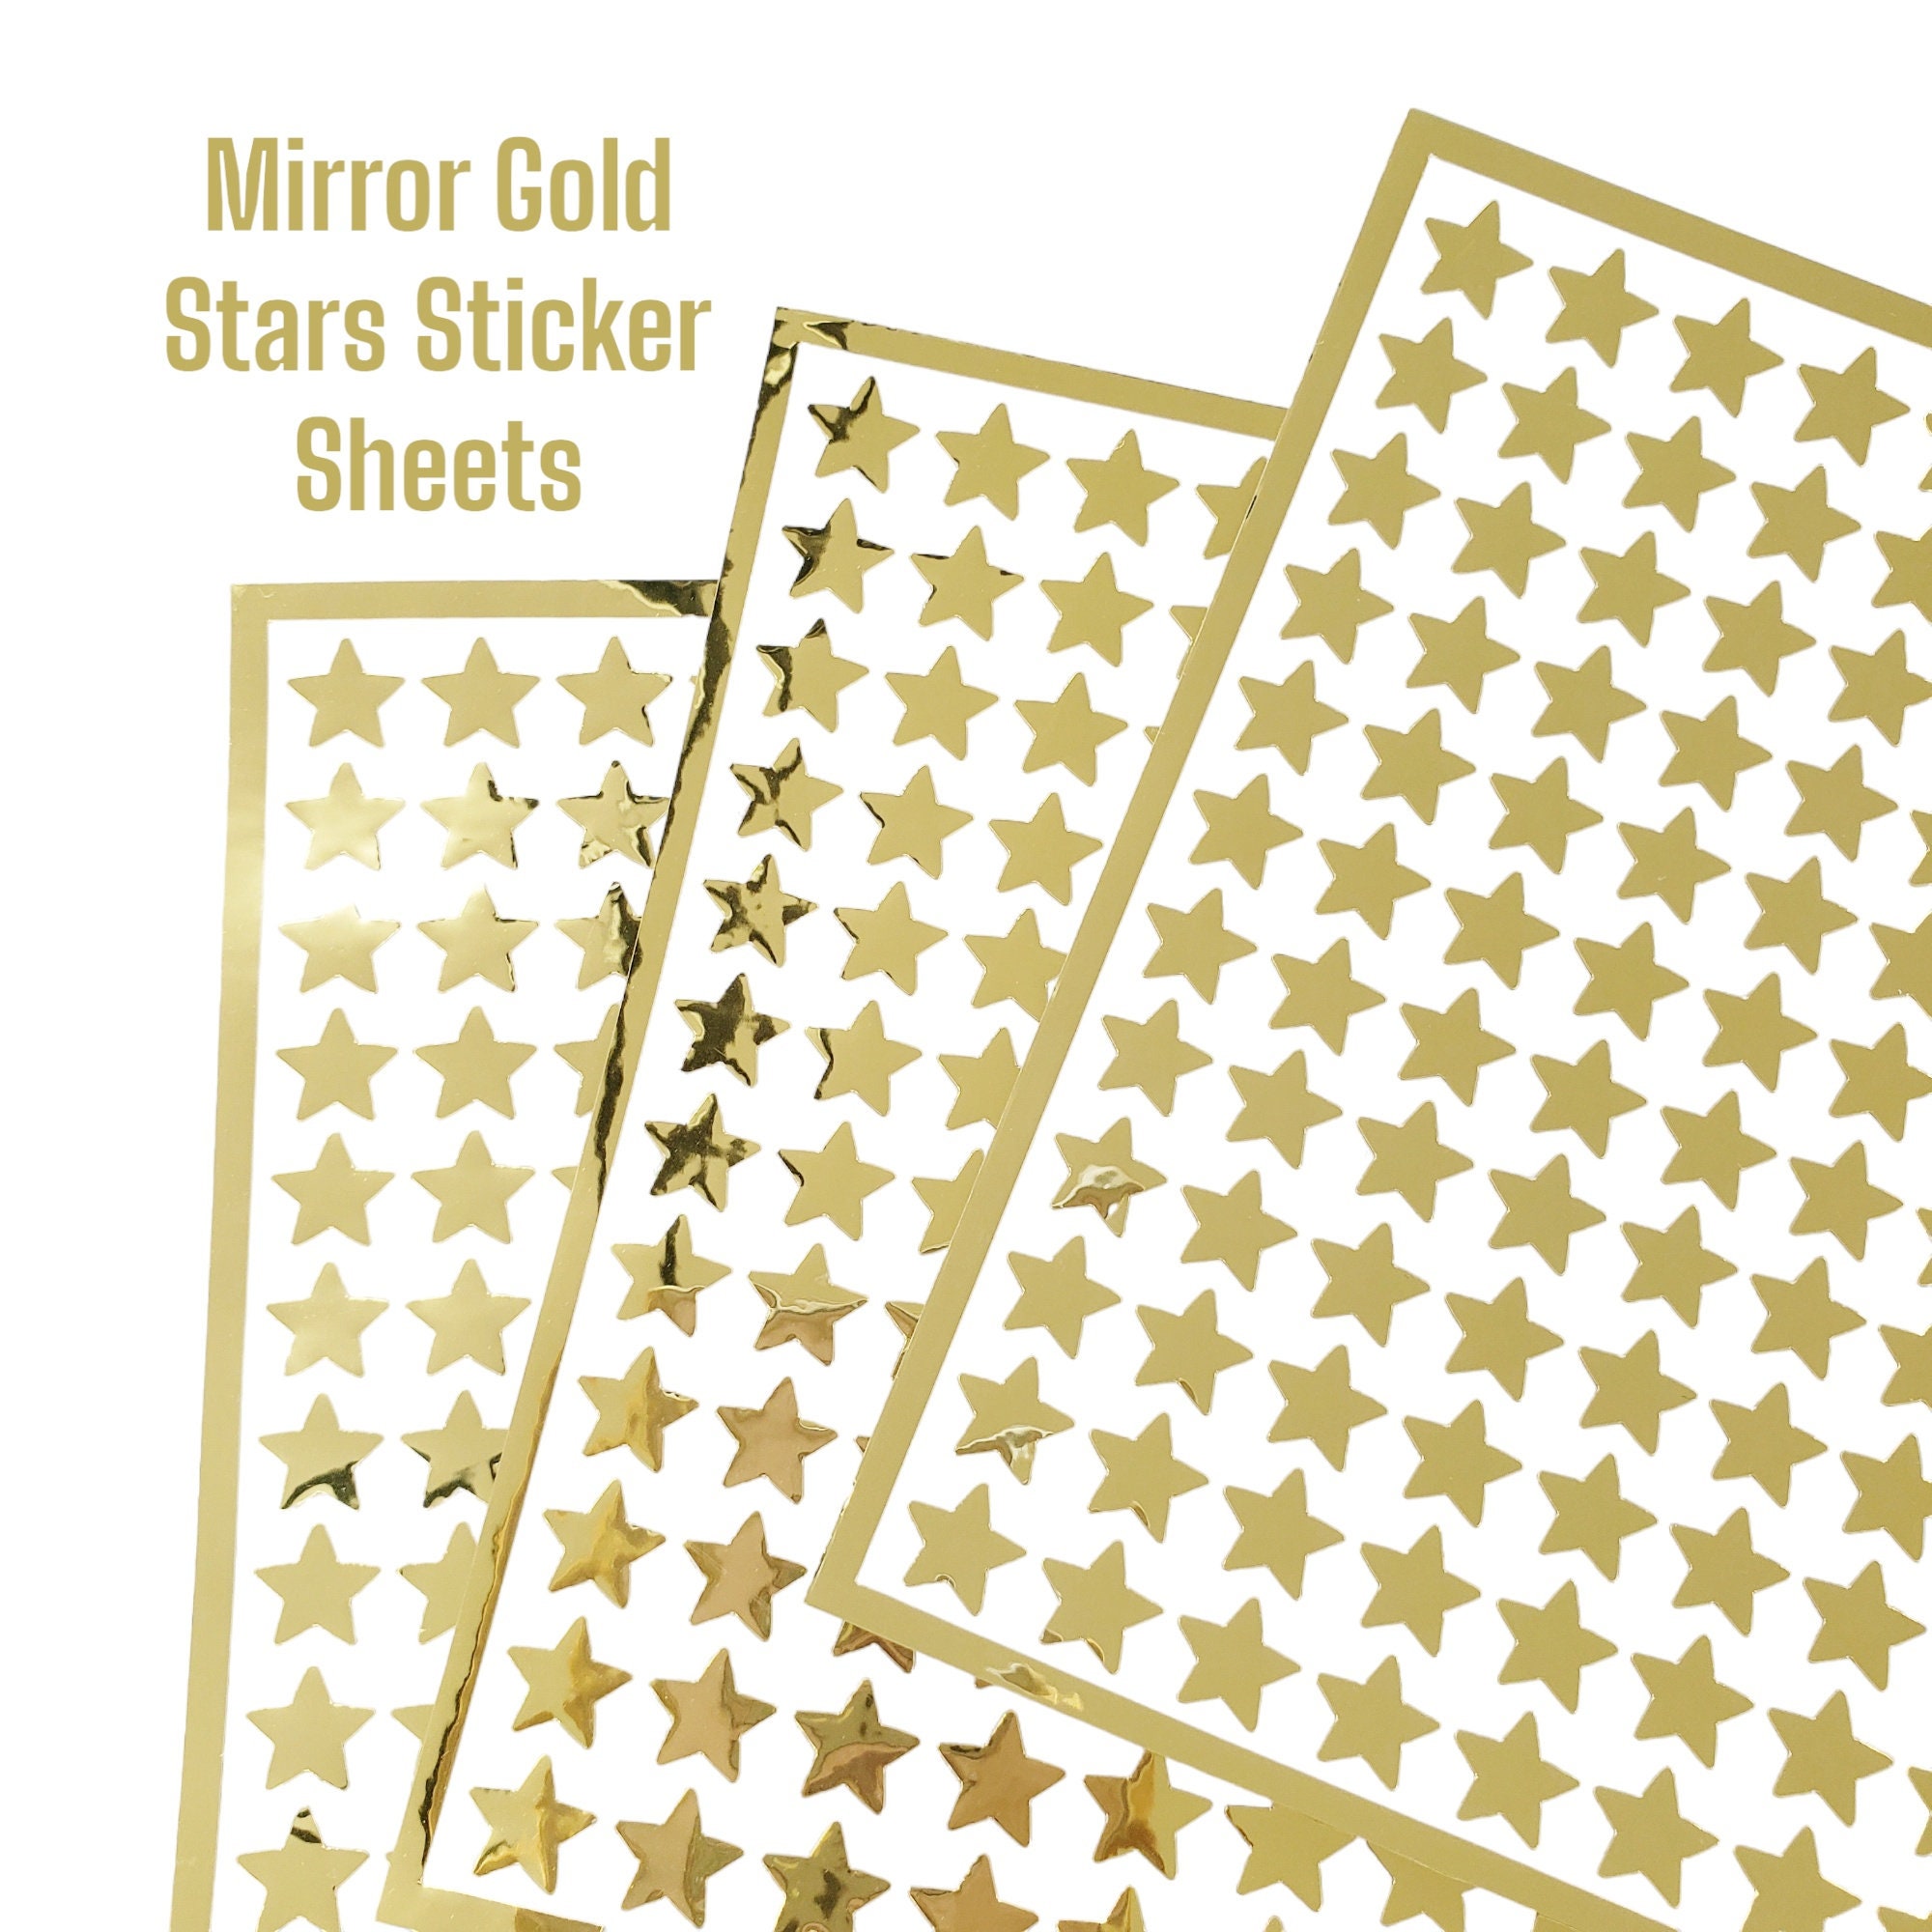 Gold Stars Sticker Sheet, Set of 192 Small Mirror Gold Star Stickers for  Wedding Meal Choice Cards, Goal and Reward Charts and Journals. 